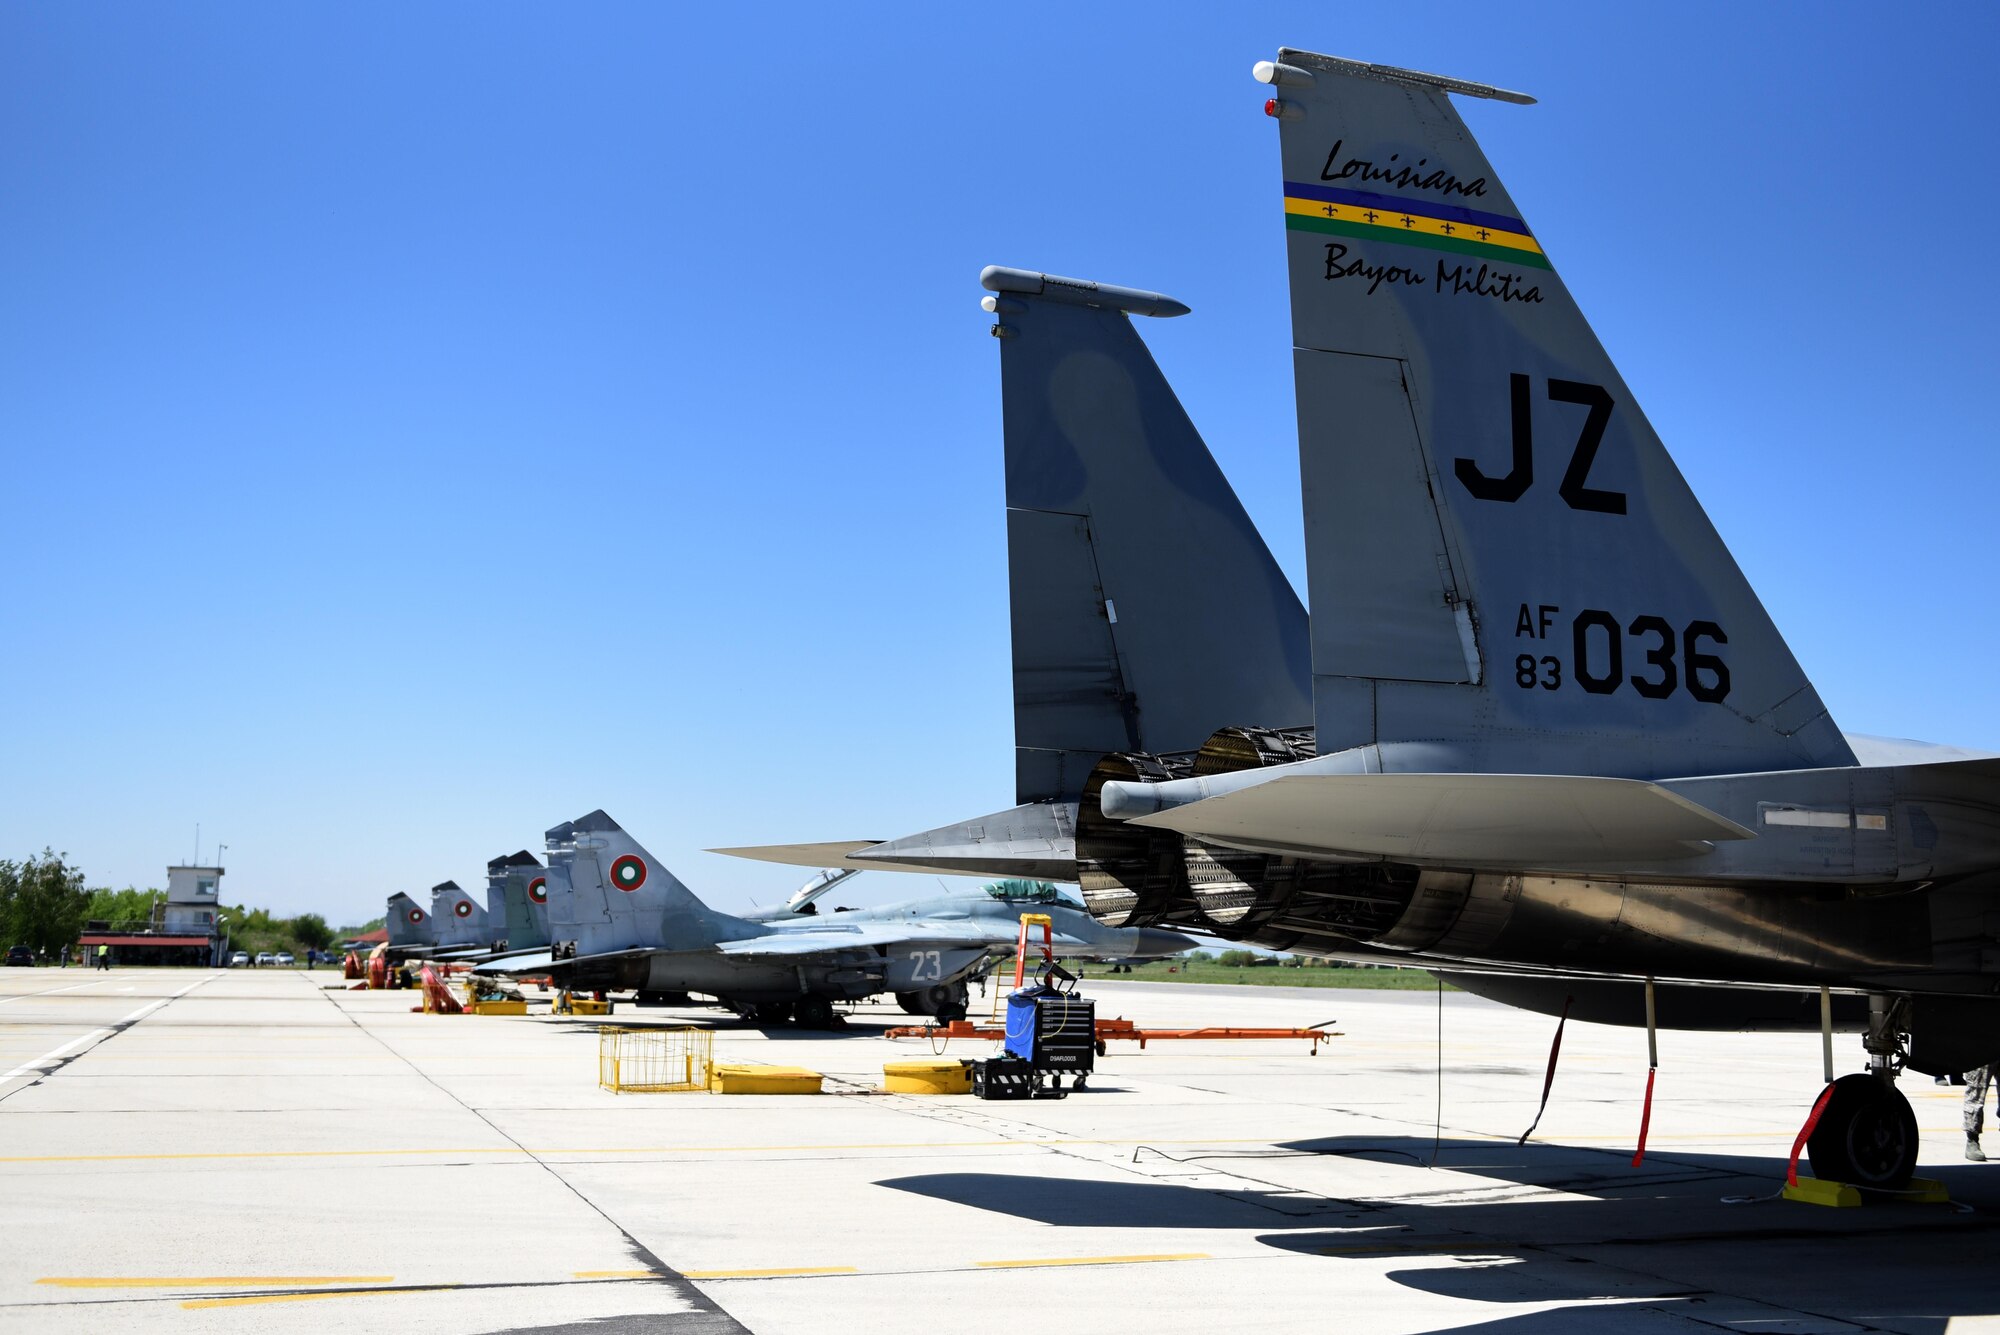 Twelve F-15C Eagles from the 122nd Expeditionary Fighter Squadron arrived at Graf Ignatievo Air Base, Bulgaria, April 26. Along with the aircraft, approximately 300 Airmen from the Louisiana and Florida Air National Guard are deployed to Europe as part of a Theater Security Package in support of Operation Atlantic Resolve with the goal of strengthening interoperability and enhancing regional security. (U.S. Air Force photo by Tech. Sgt. Staci Miller)